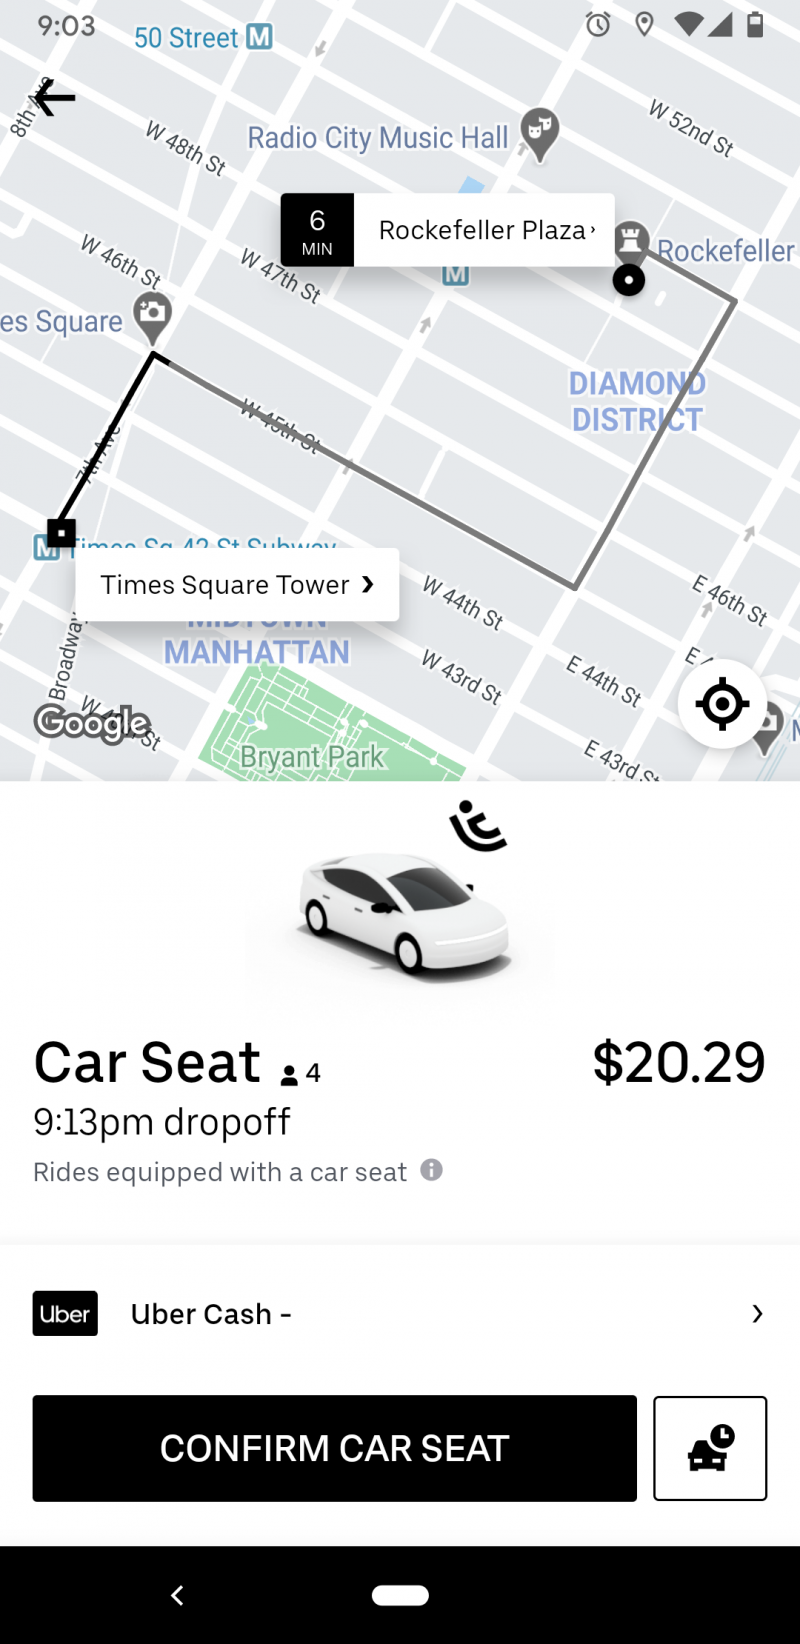 How To Request An Uber With A Car Seat